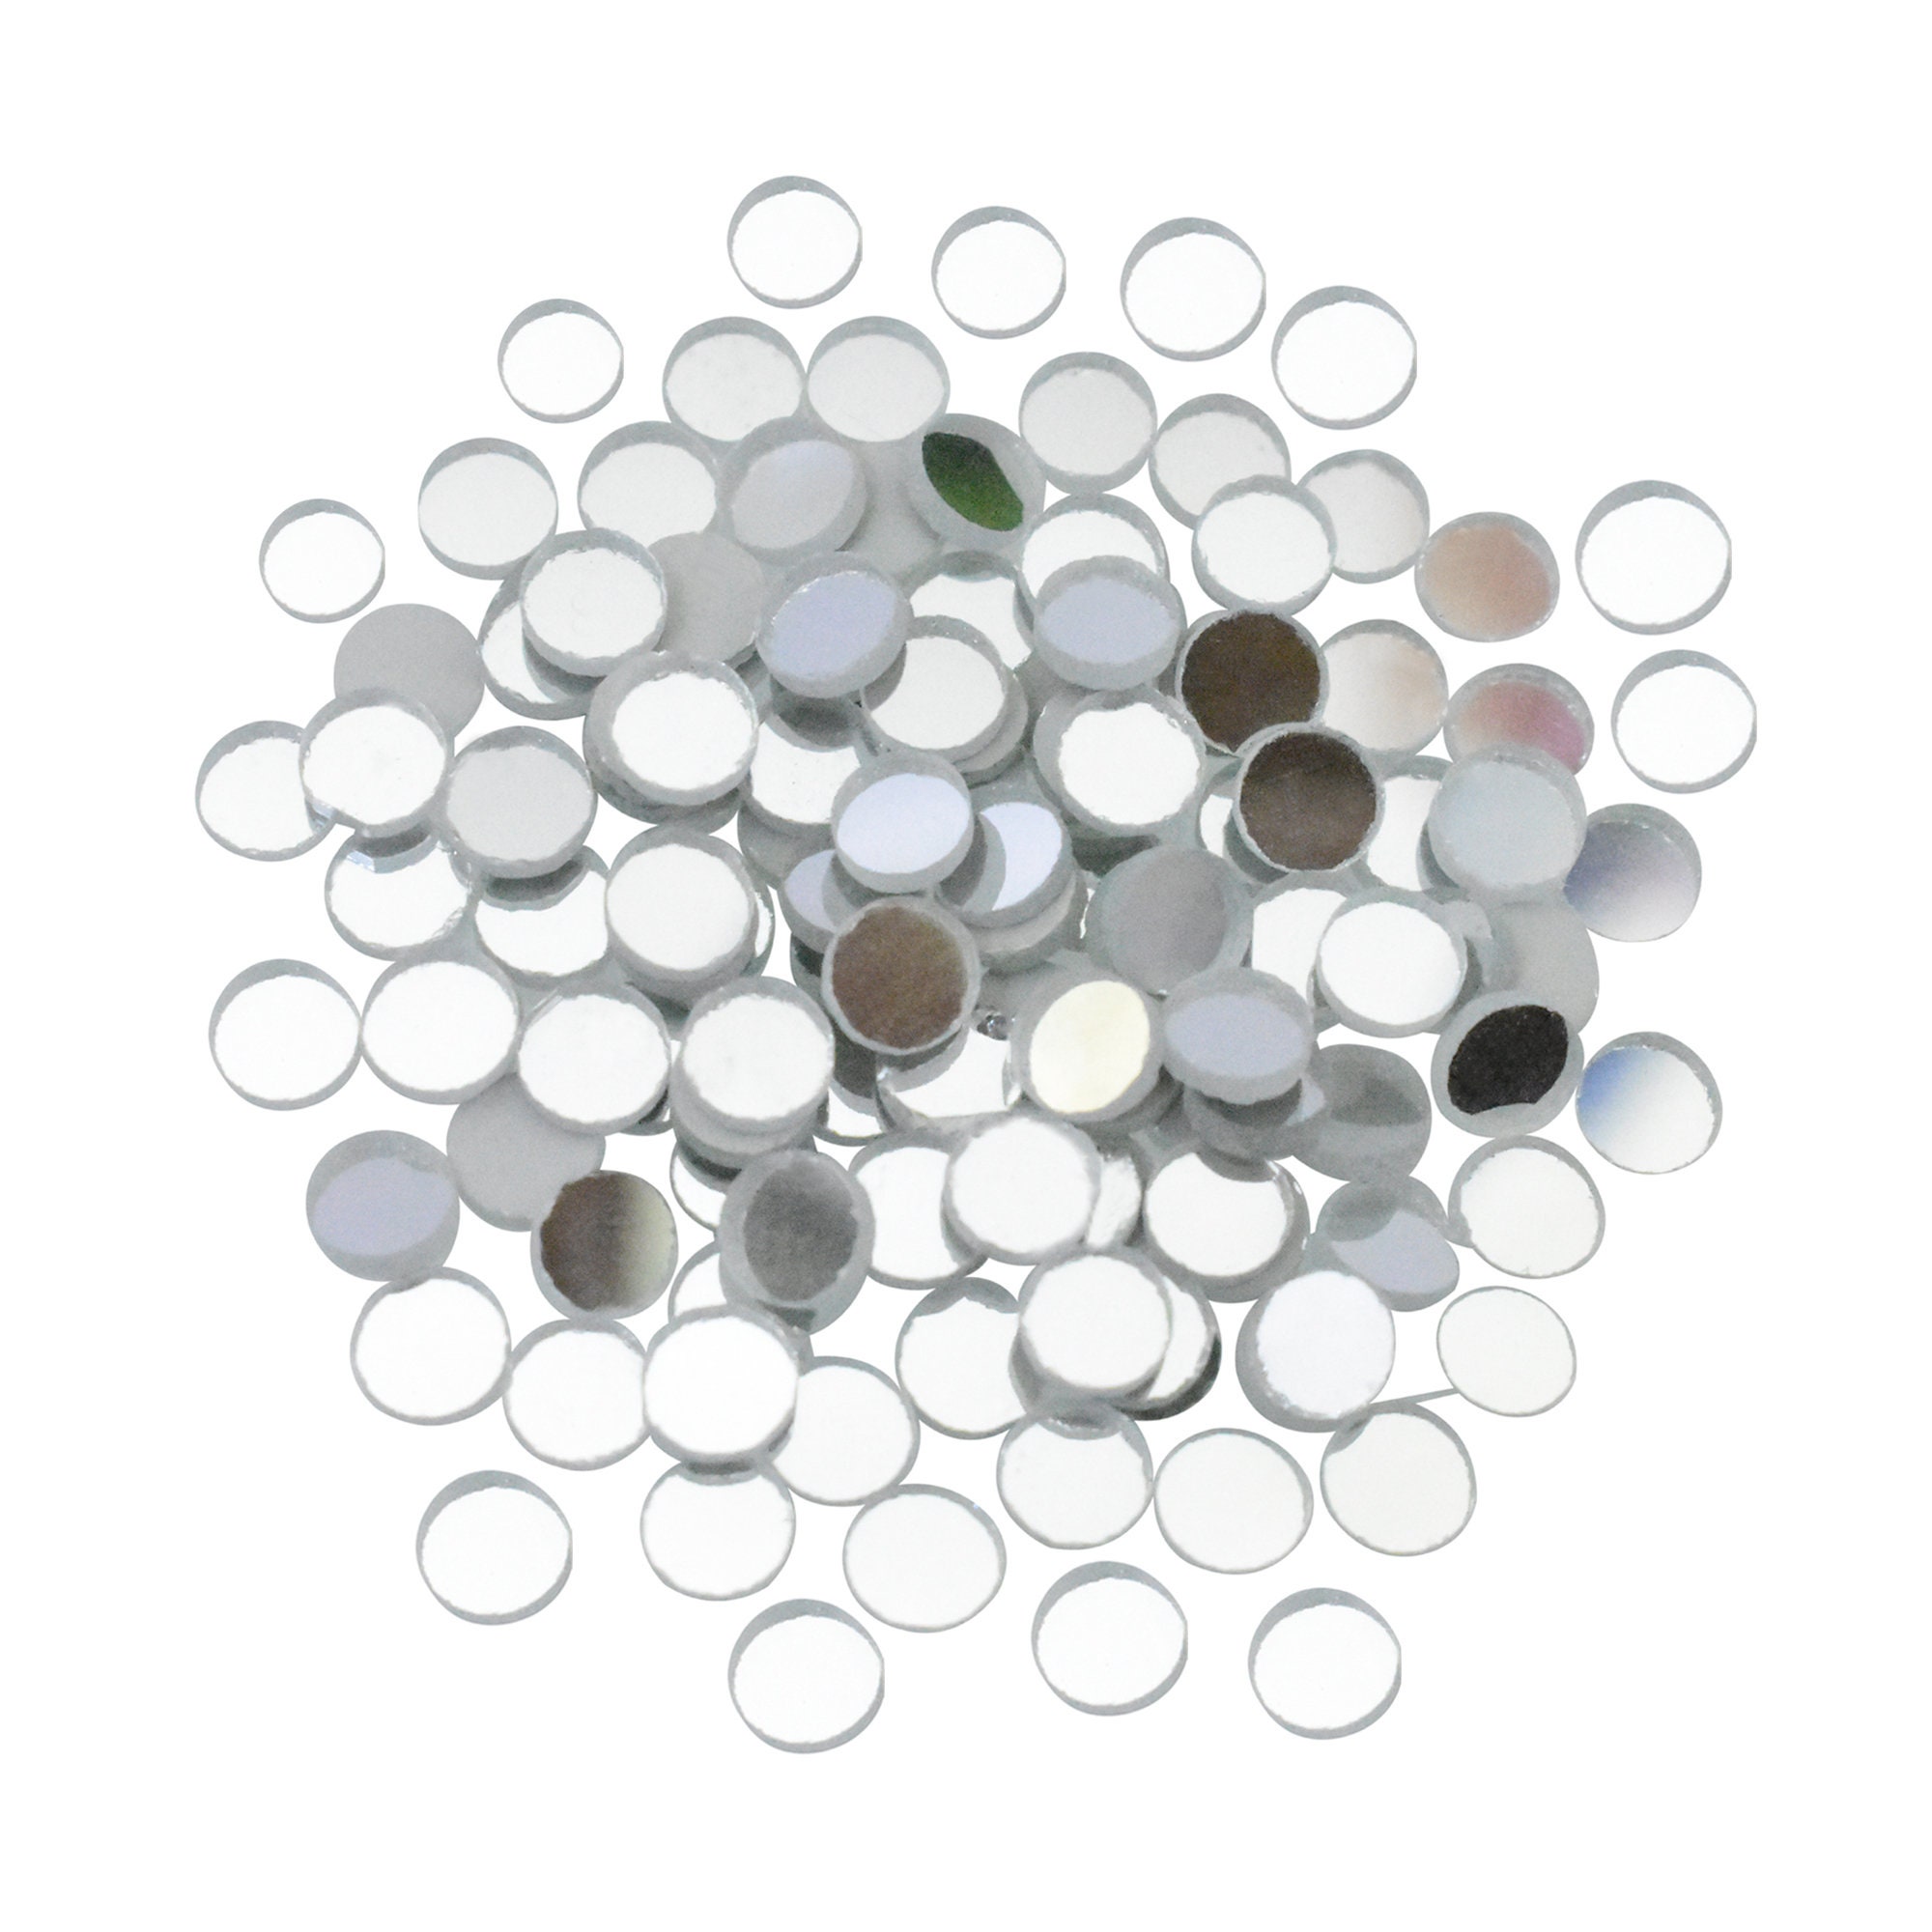 Small Round Acrylic MIRRORS STICKERS 3cm Silver Dots Mosaic crafts QTY 25